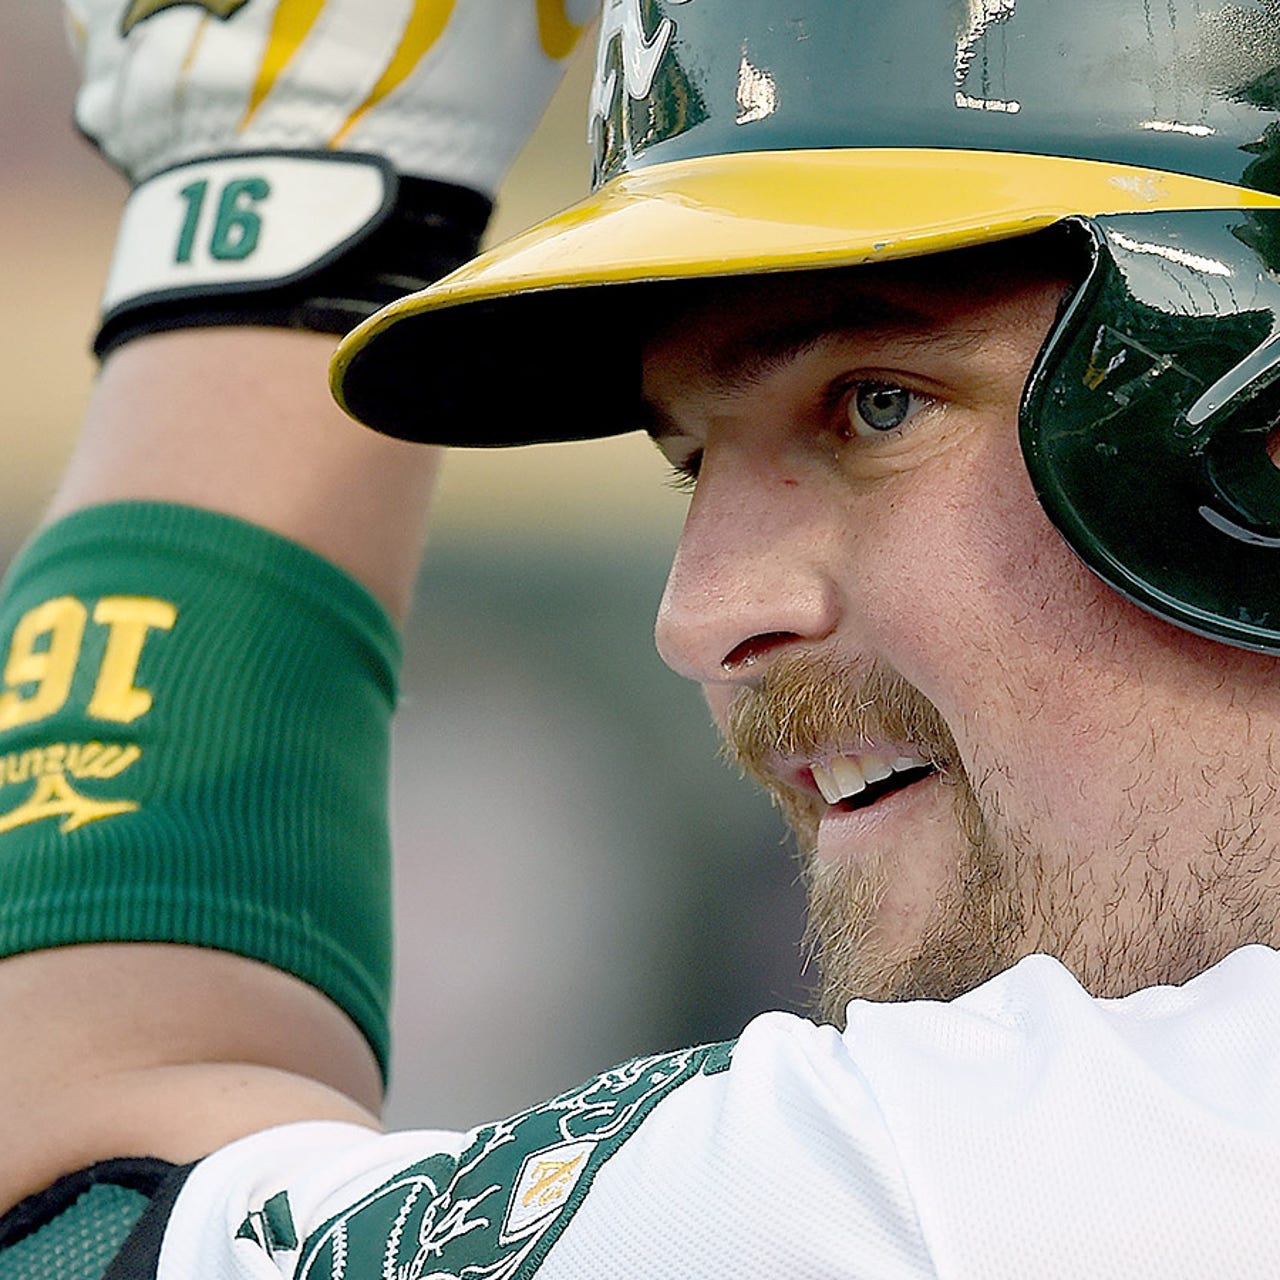 A's Billy Butler struggling through 1st season with new team